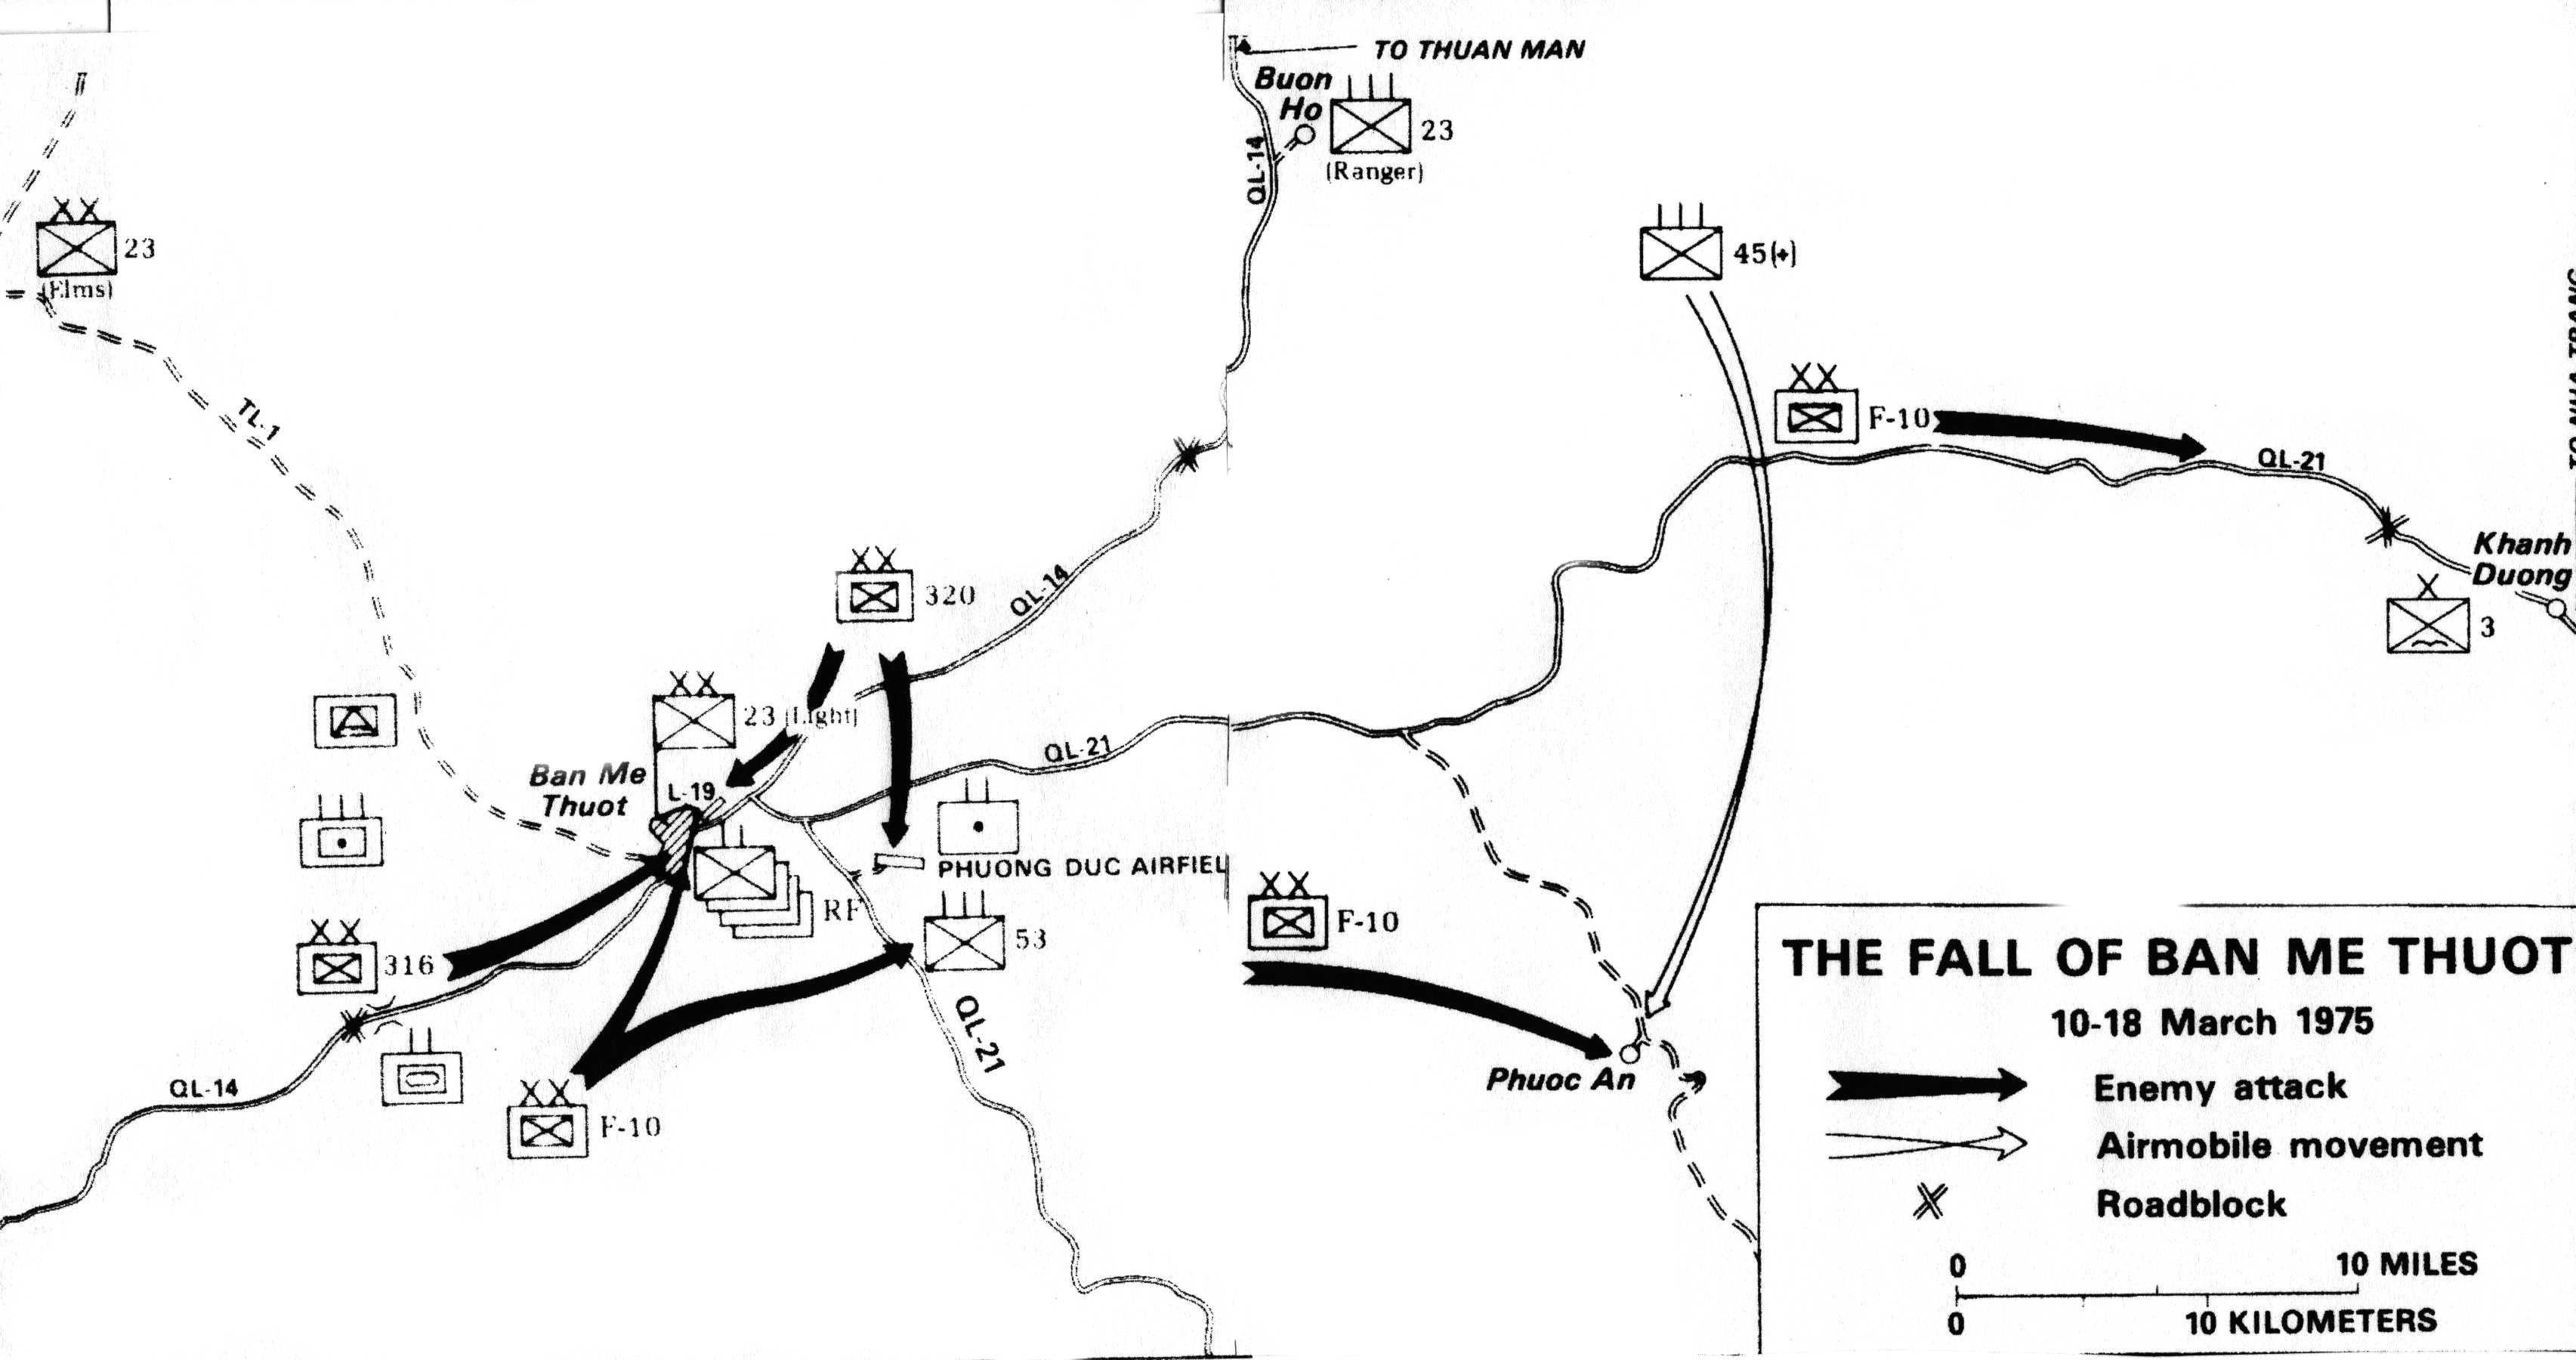 1975 spring offensive